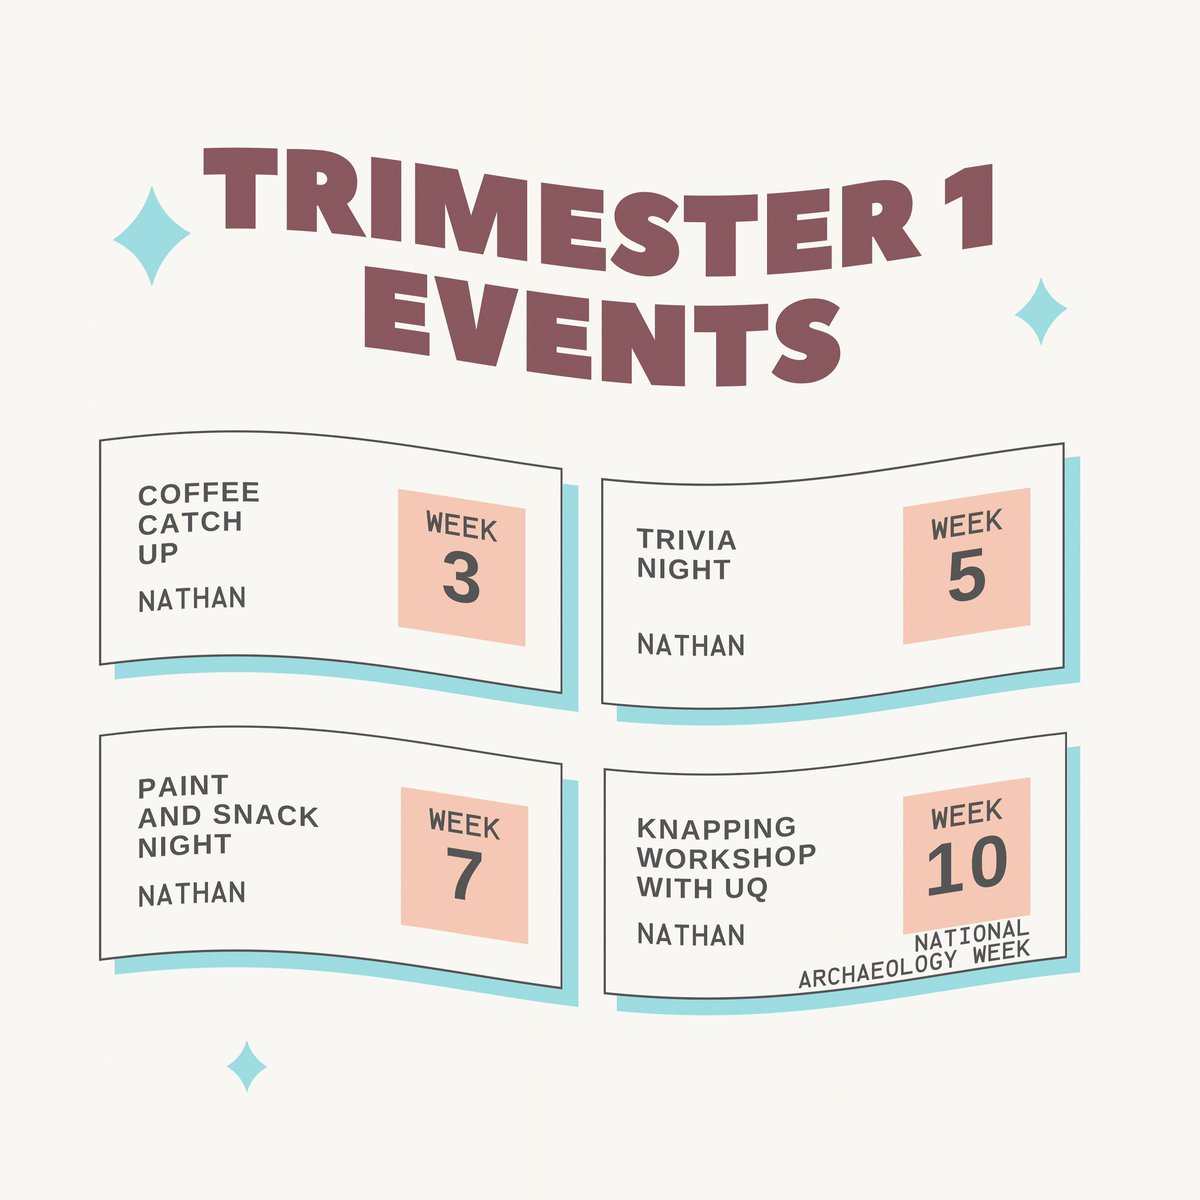 Our Trimester 1 event calendar is here! We can't wait to see you all soon, stay tuned for more event specific details coming soon 🤗